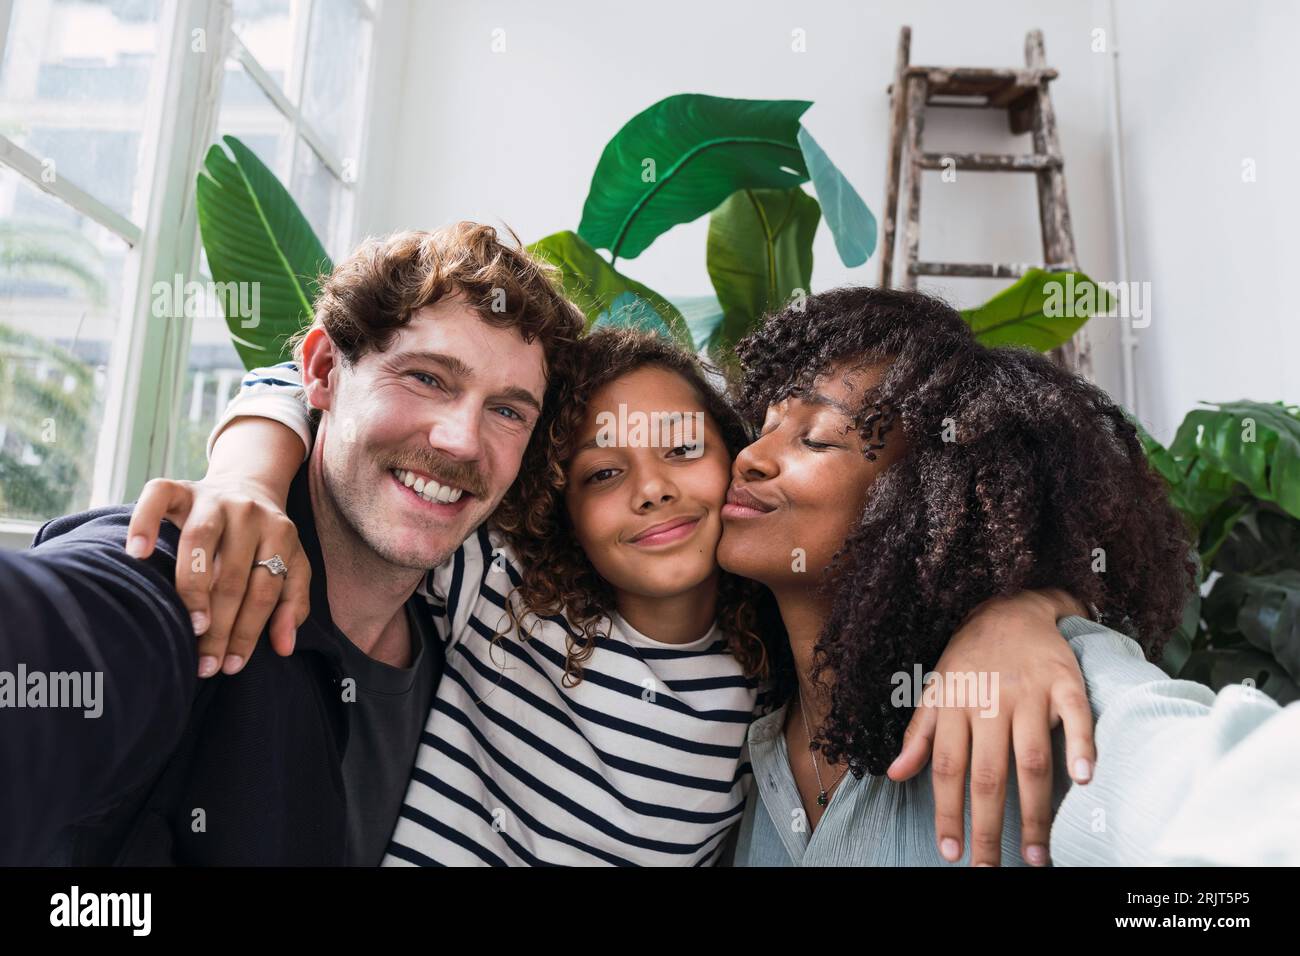 A joyful family captures a moment together in a winter garden with a fun selfie Stock Photo